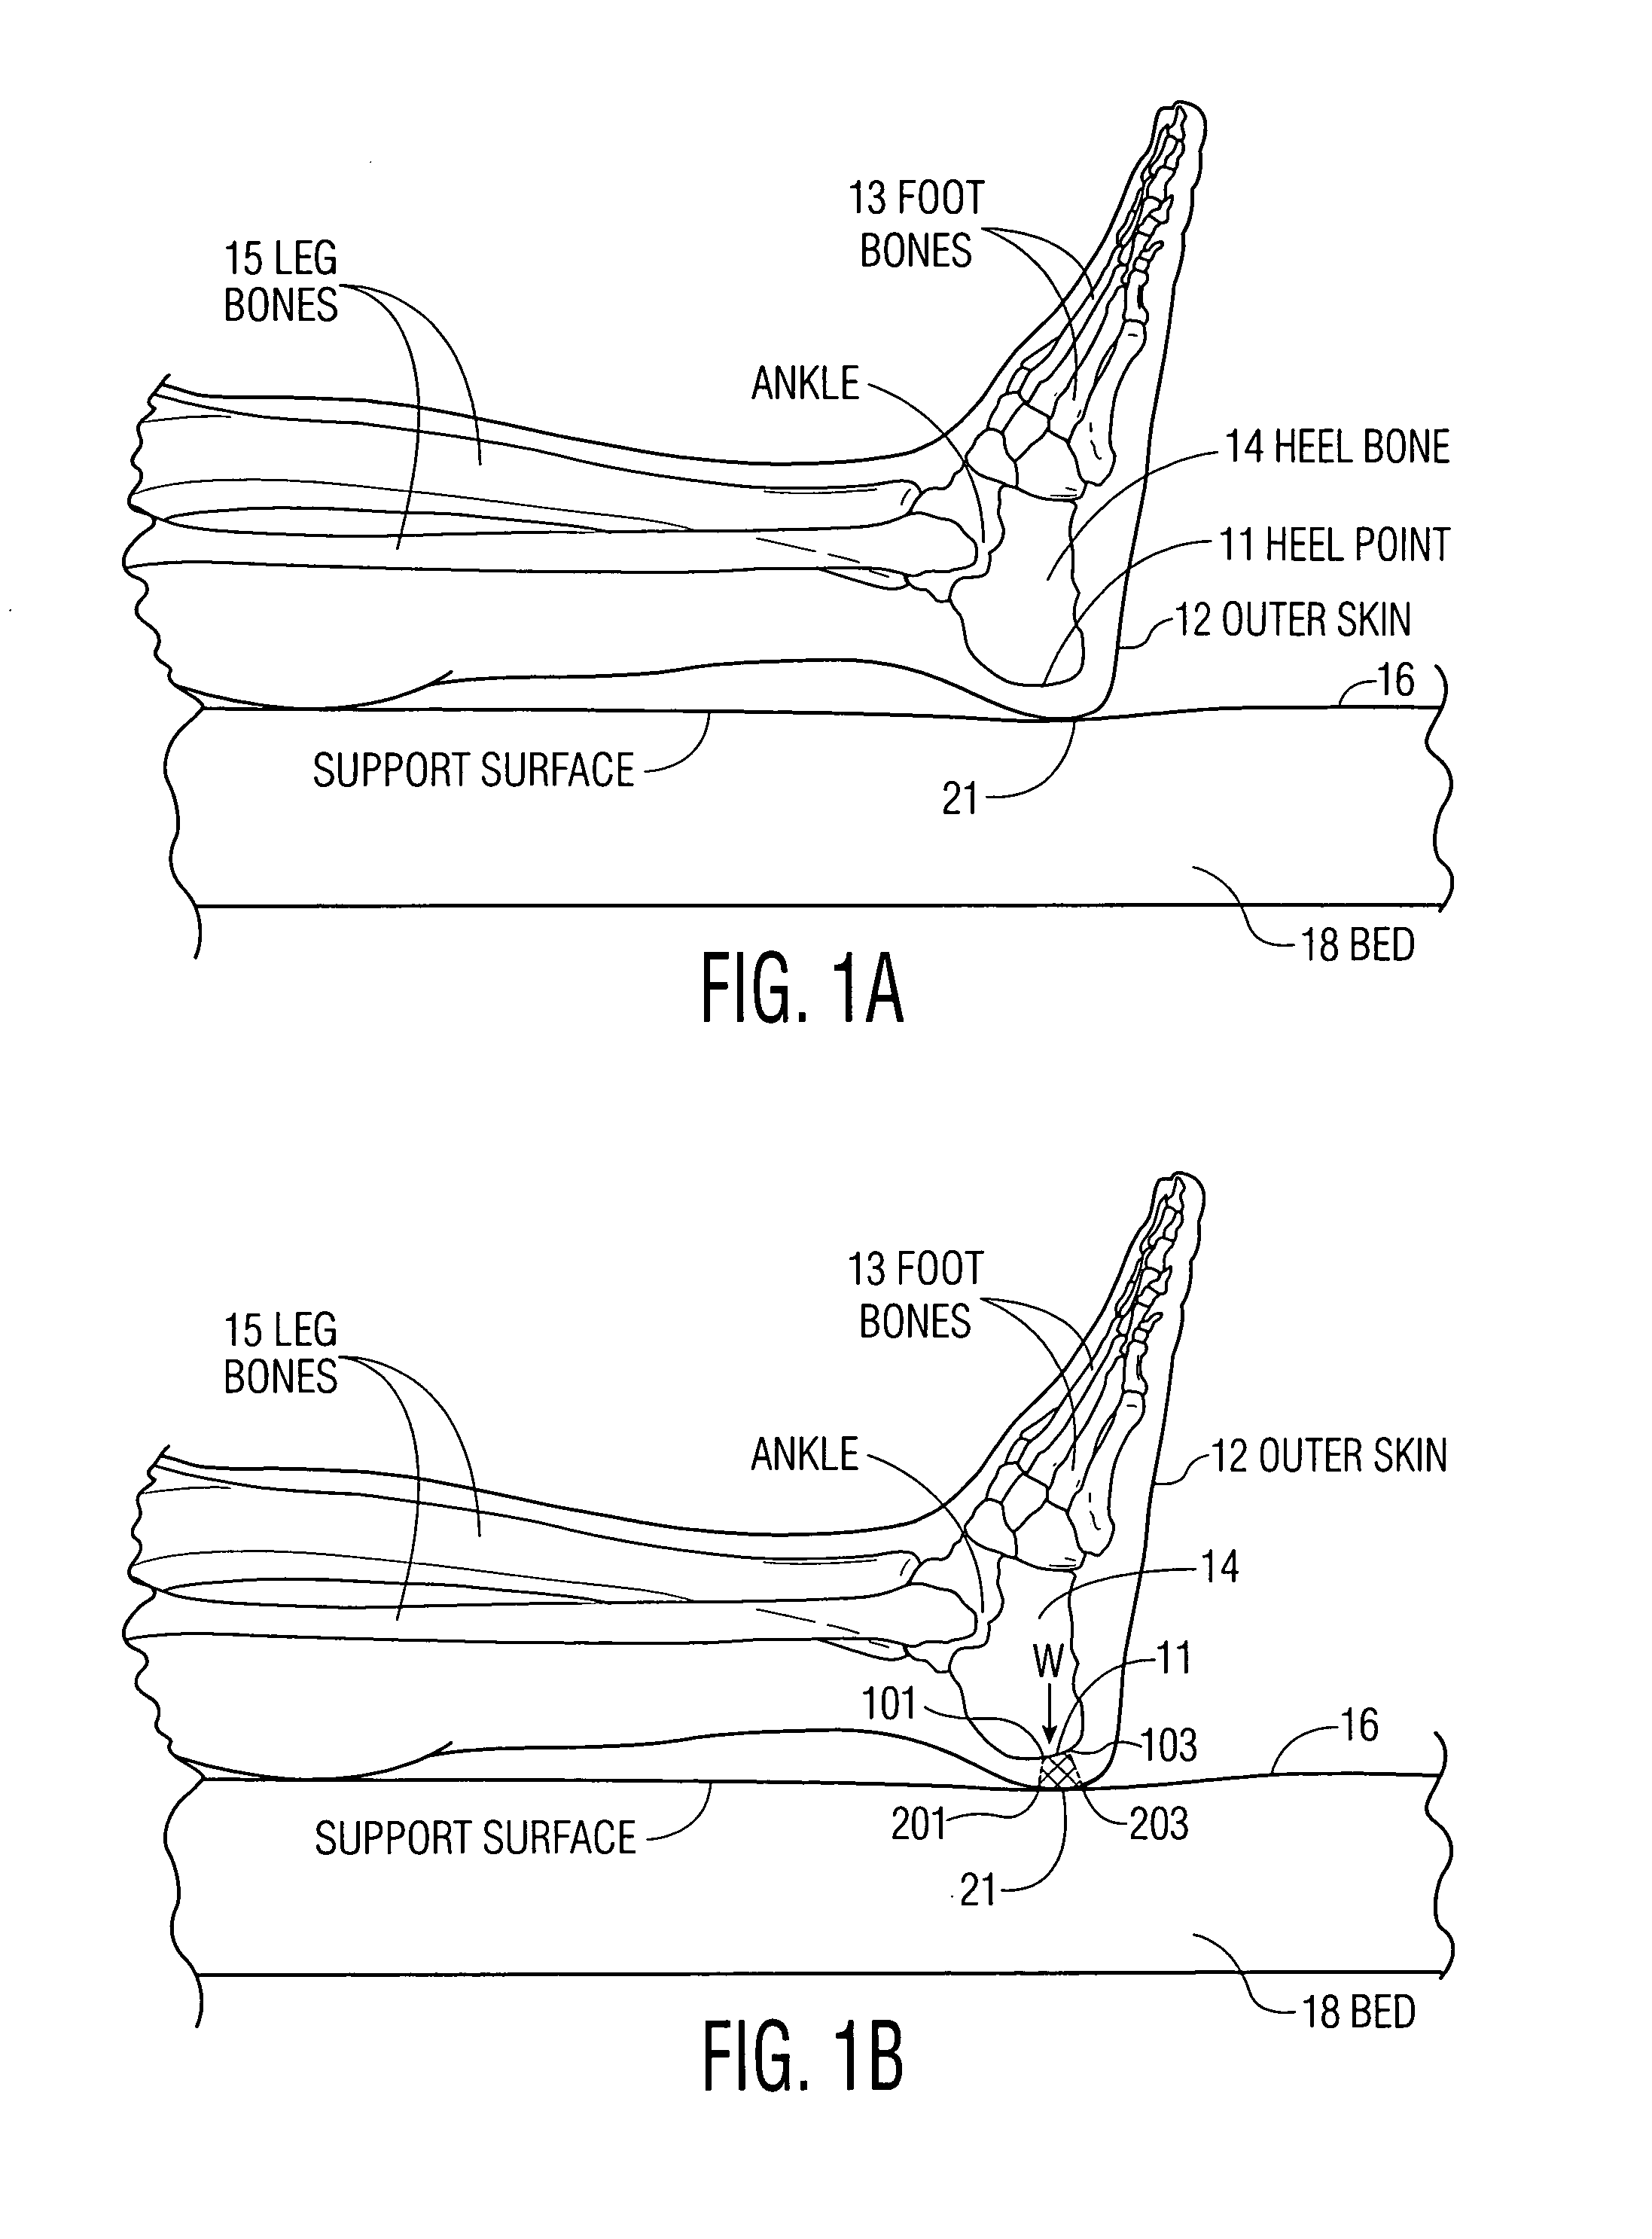 Apparatus and methods for preventing and/or healing pressure ulcers